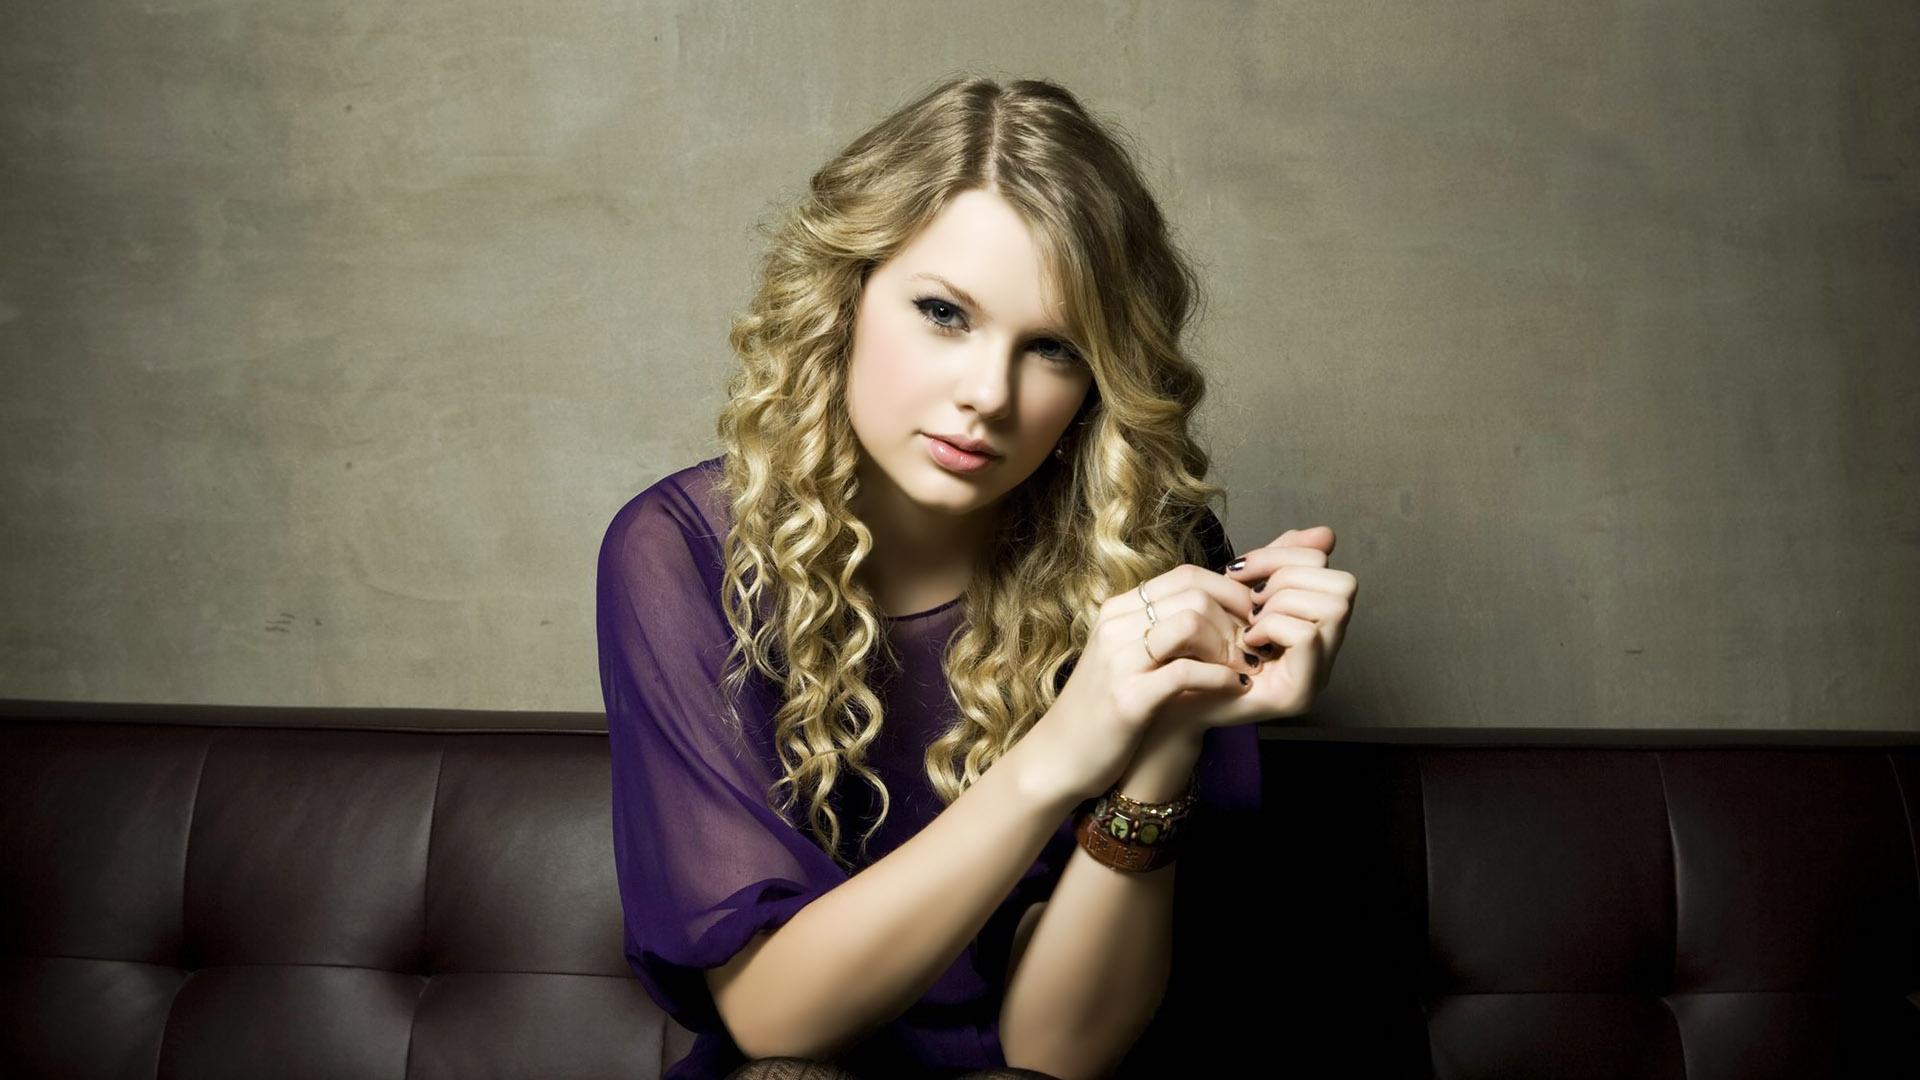 Taylor Swift Wallpaper, Get Free top quality Taylor Swift